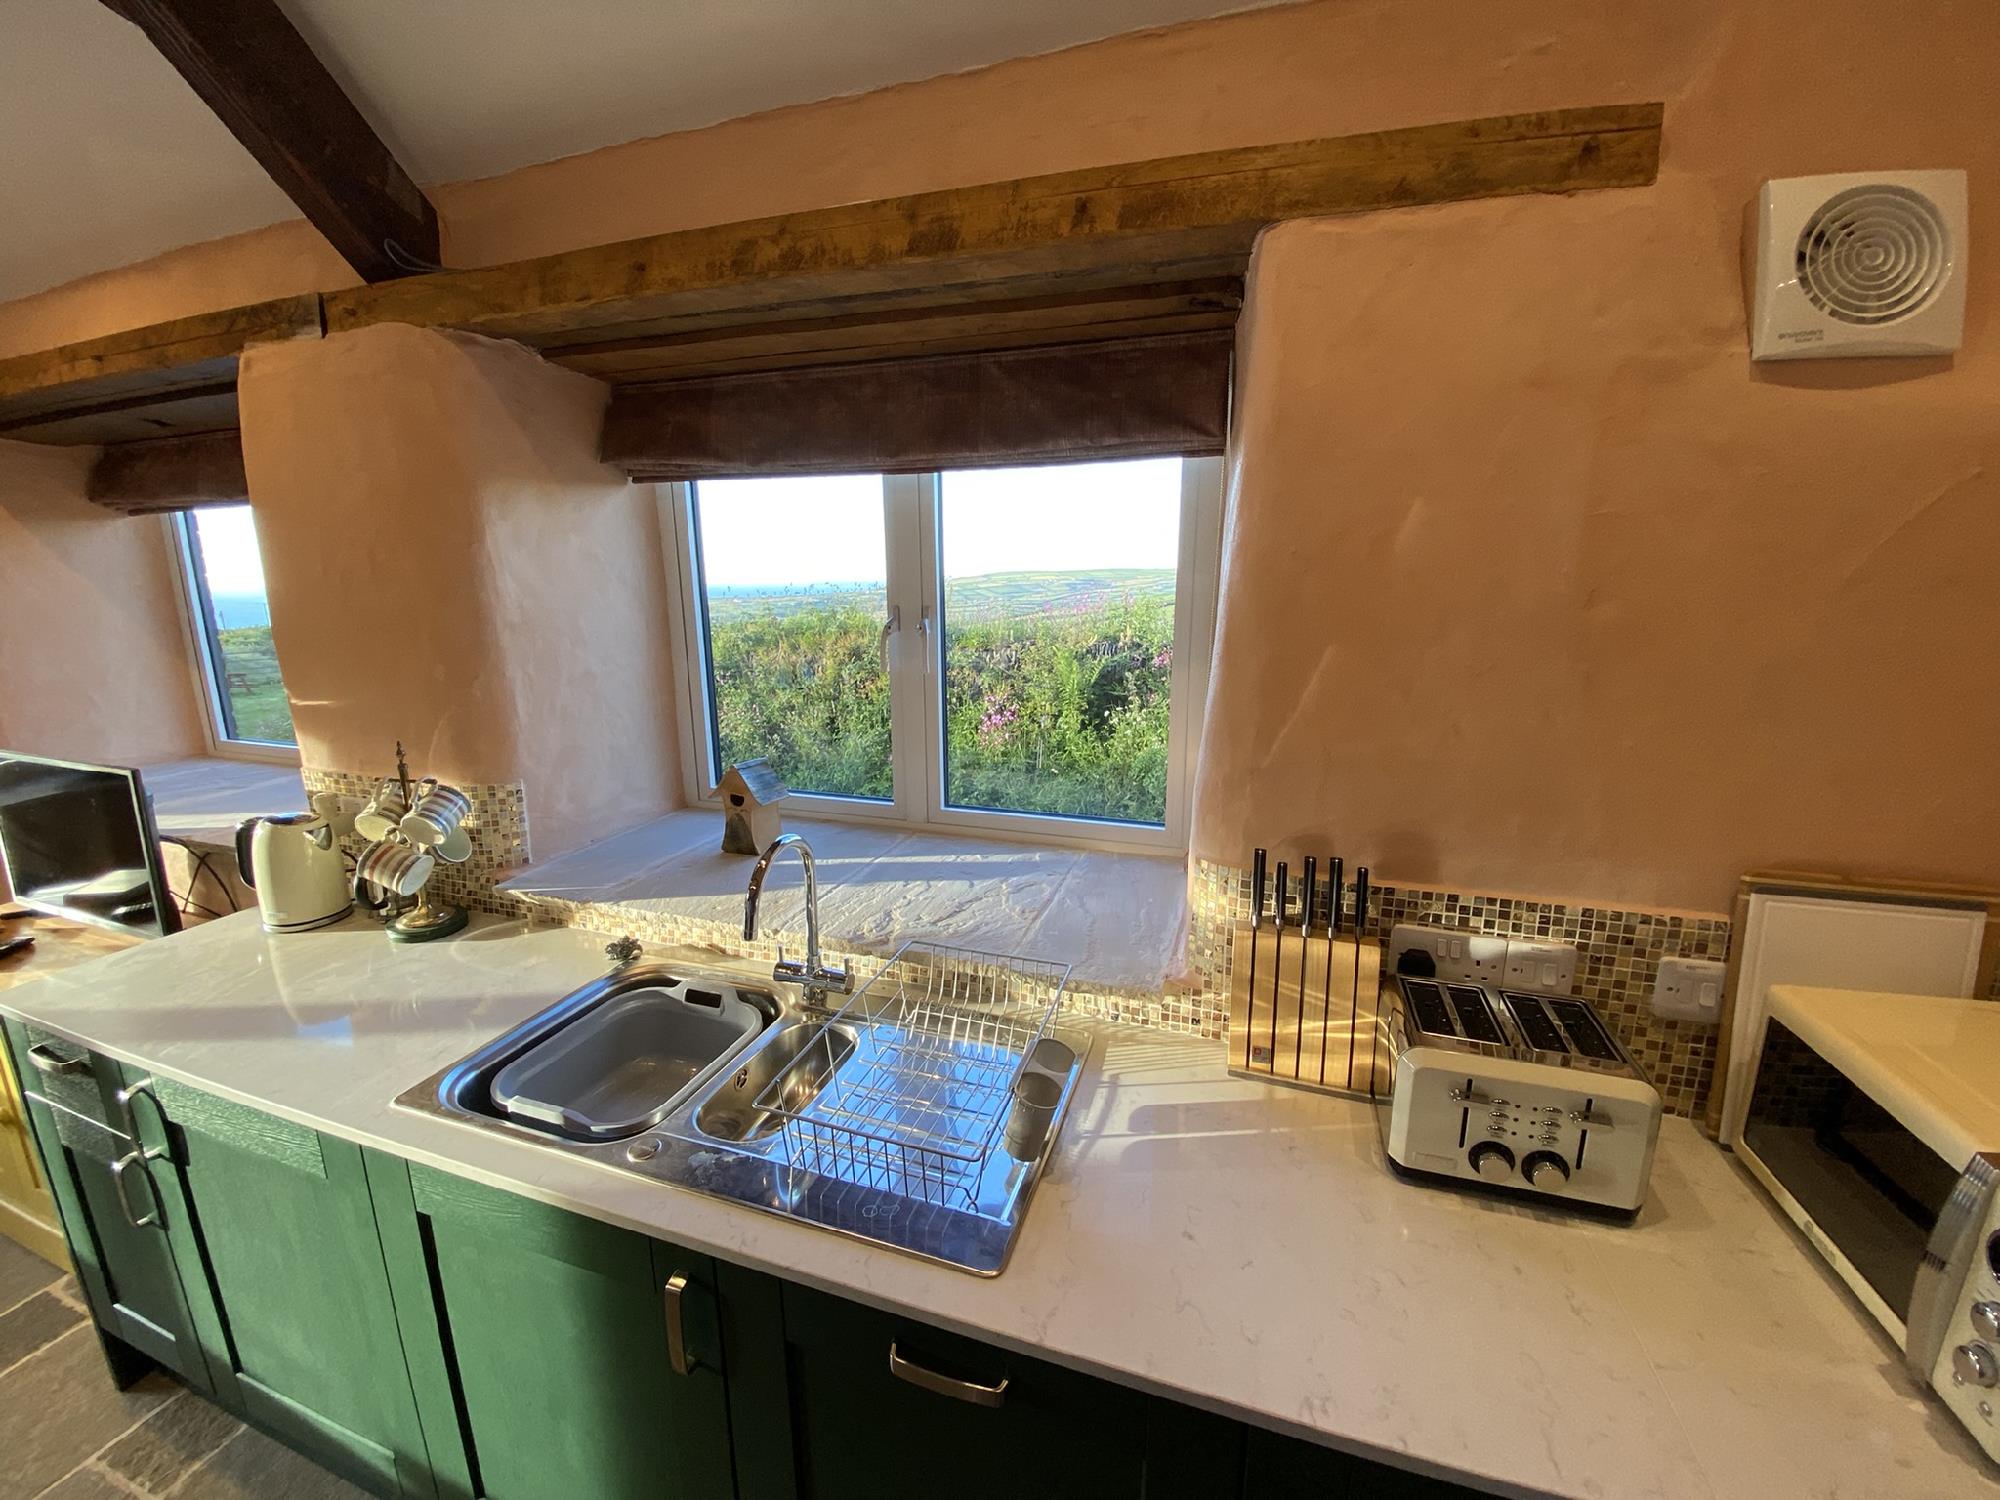 Stunning rural views from the kitchen at sea view Blueberry cottage Polrunny Farm holiday cottages Boscastle Cornwall